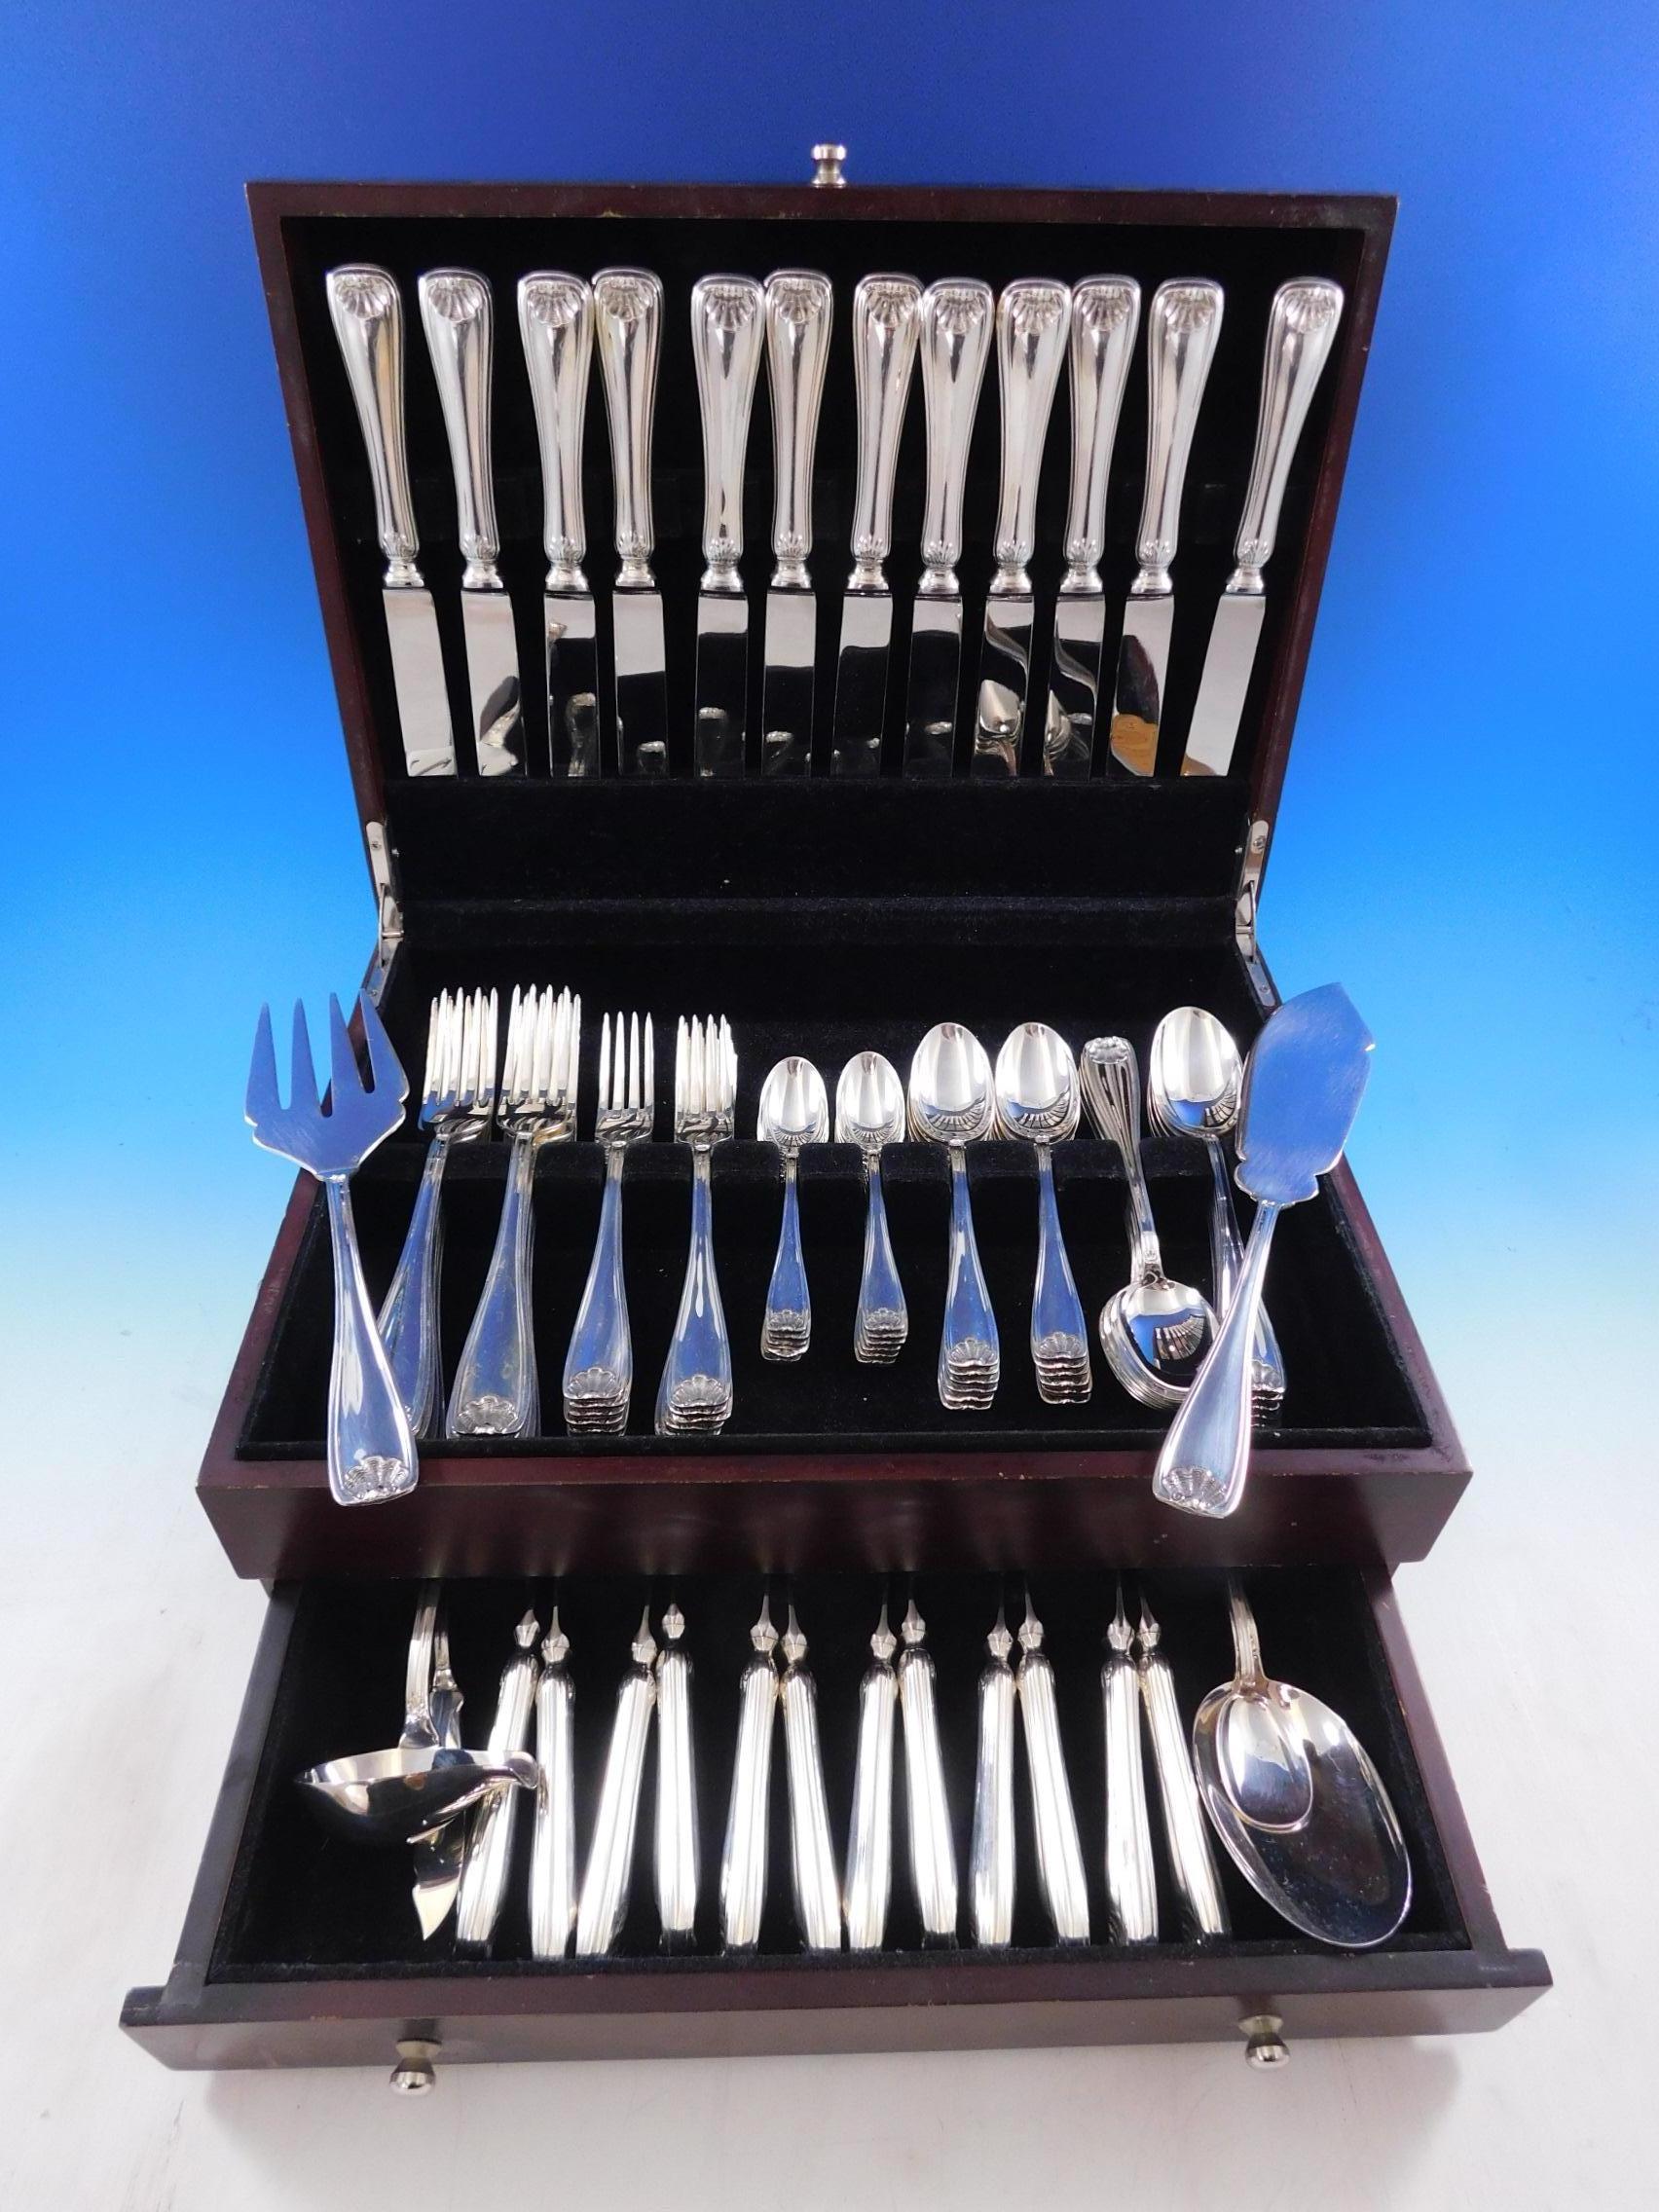 Continental size Cellini by Fortunoff Italy shell motif sterling silver flatware set, 90 pieces. This set includes:

12 continental size knives, 9 1/2